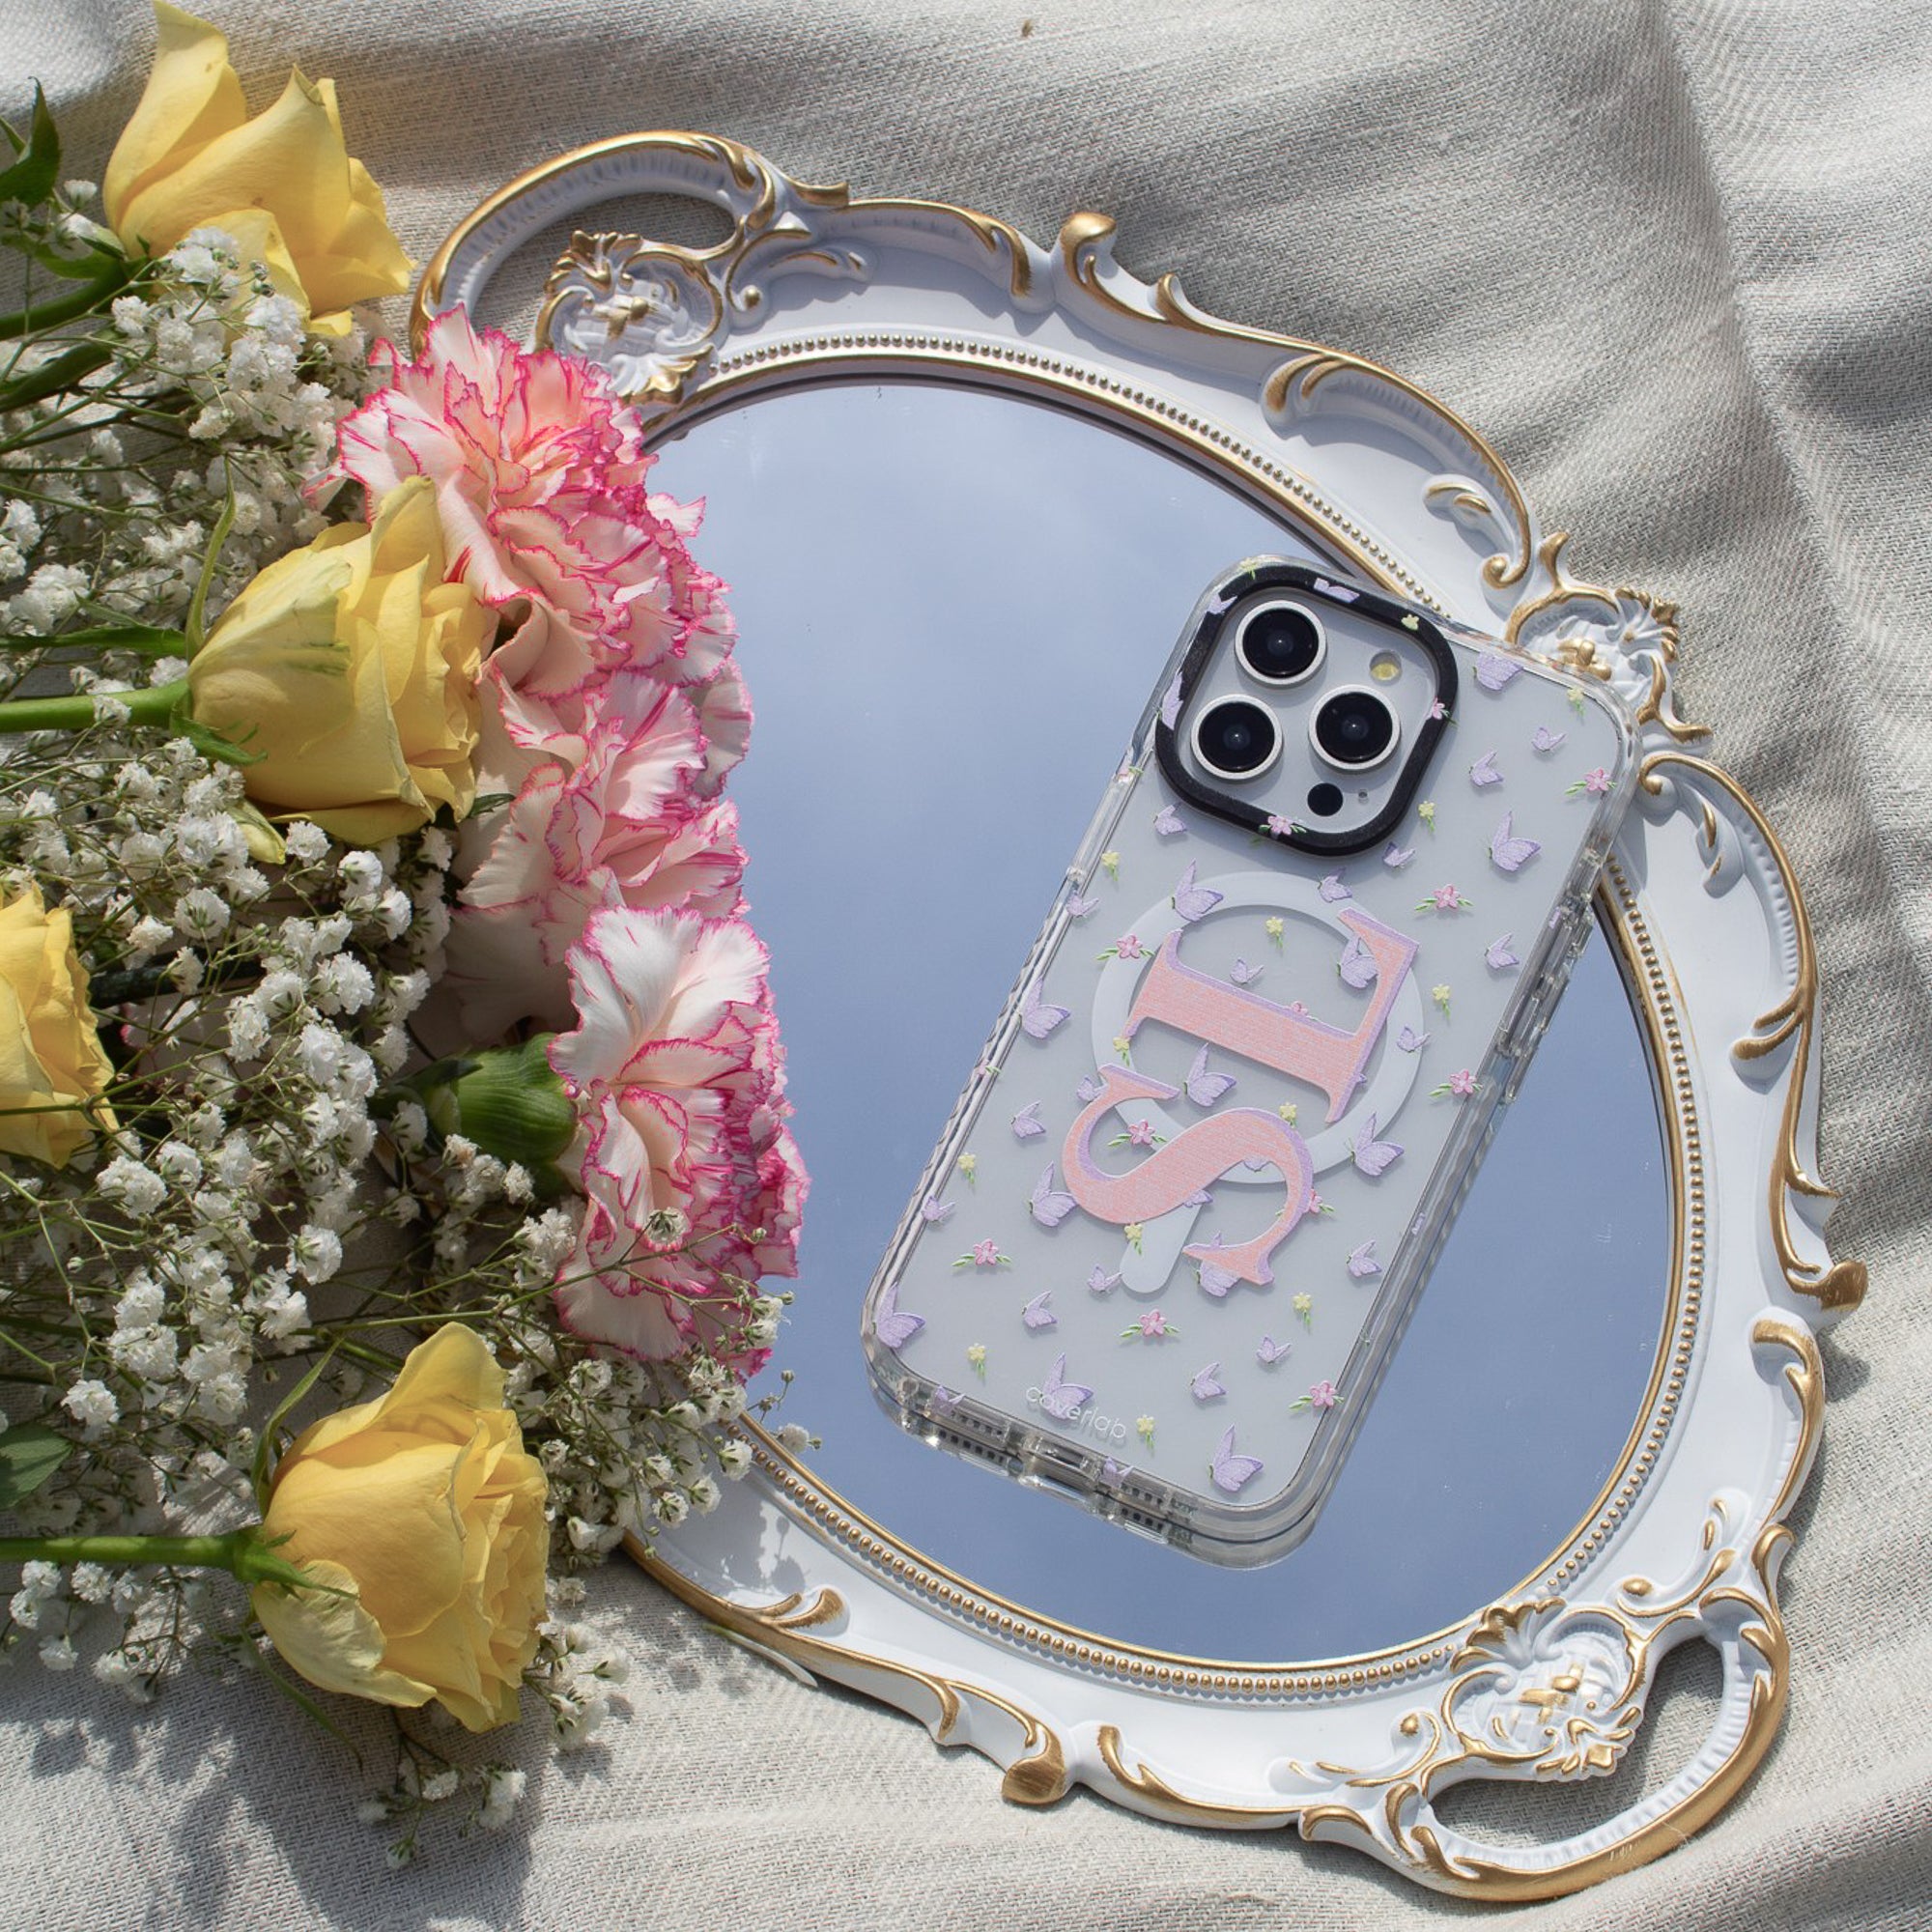 Blooming Personalised MagSafe iPhone Case